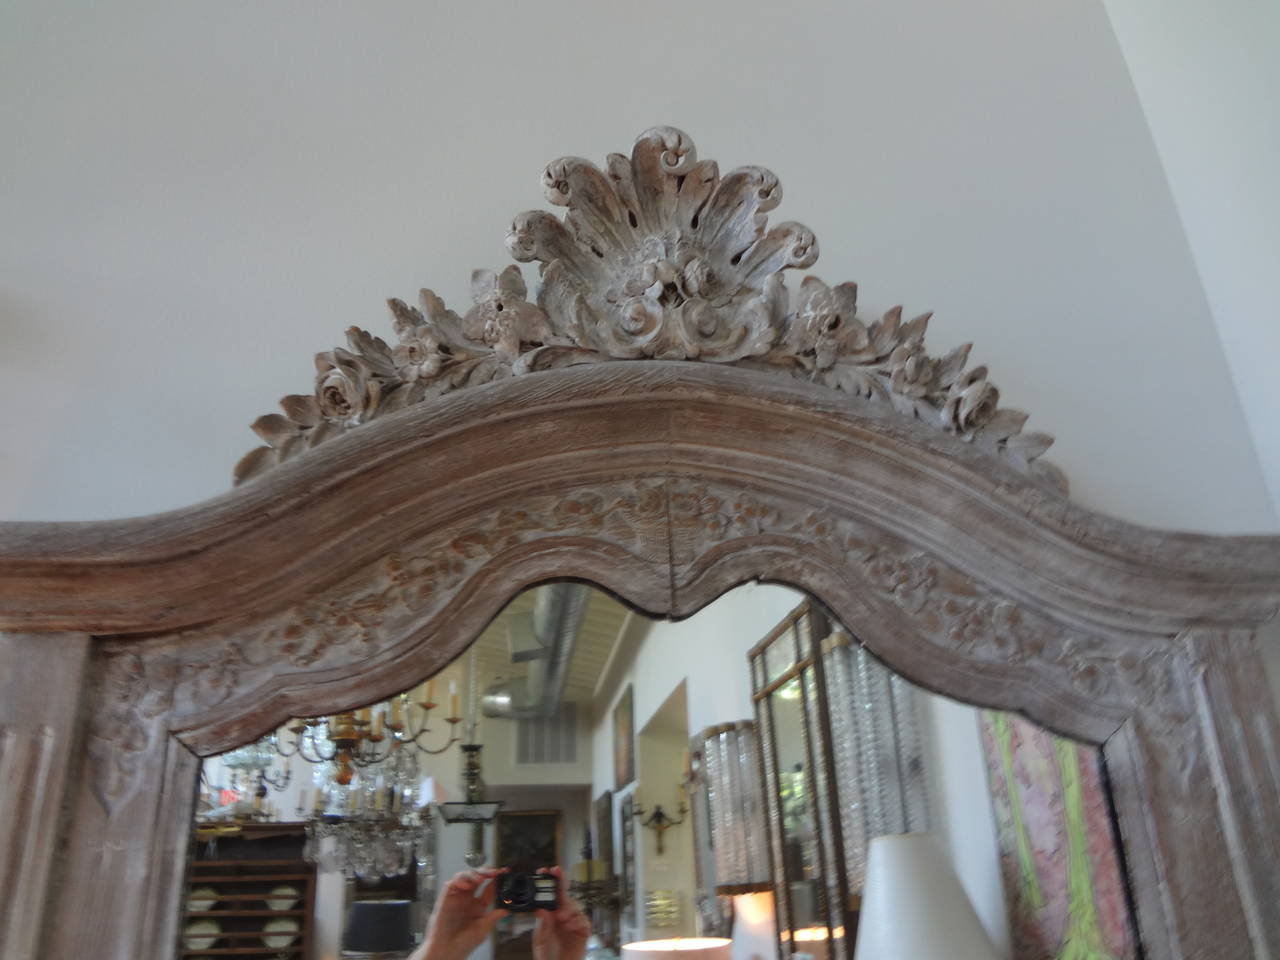 Beautifully distressed French Louis XV style mirror from the 19th century.

Please click KIRBY ANTIQUES logo below to view additional pieces from our vast inventory.